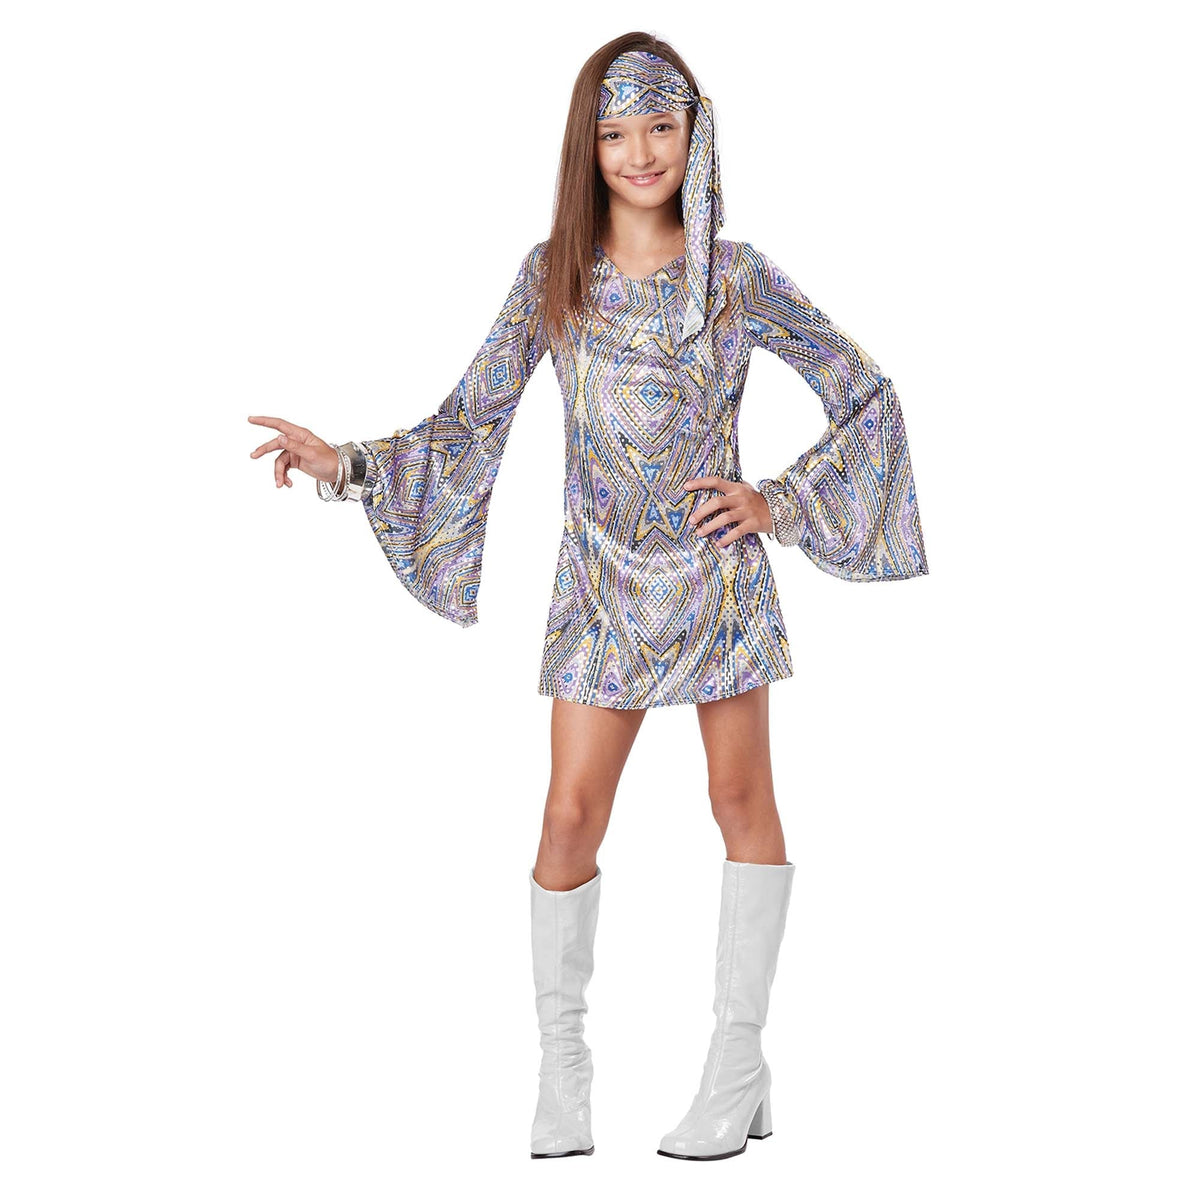 CALIFORNIA COSTUMES Costumes Disco Darling Costume for Kids, 70's Dress and Head Tie